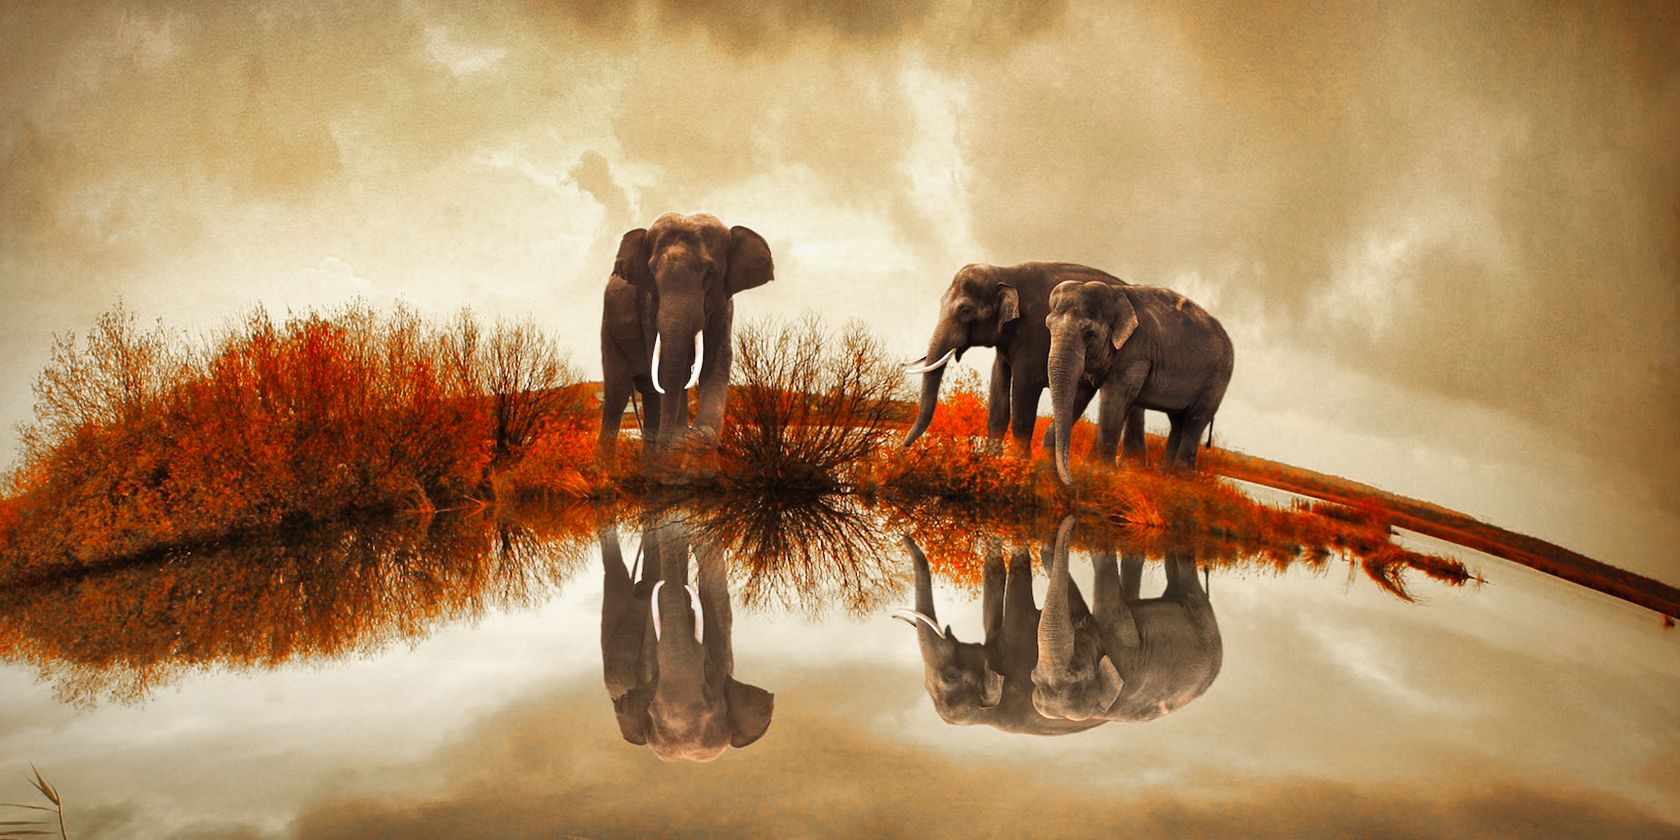 Elephants near drinking source with reflection